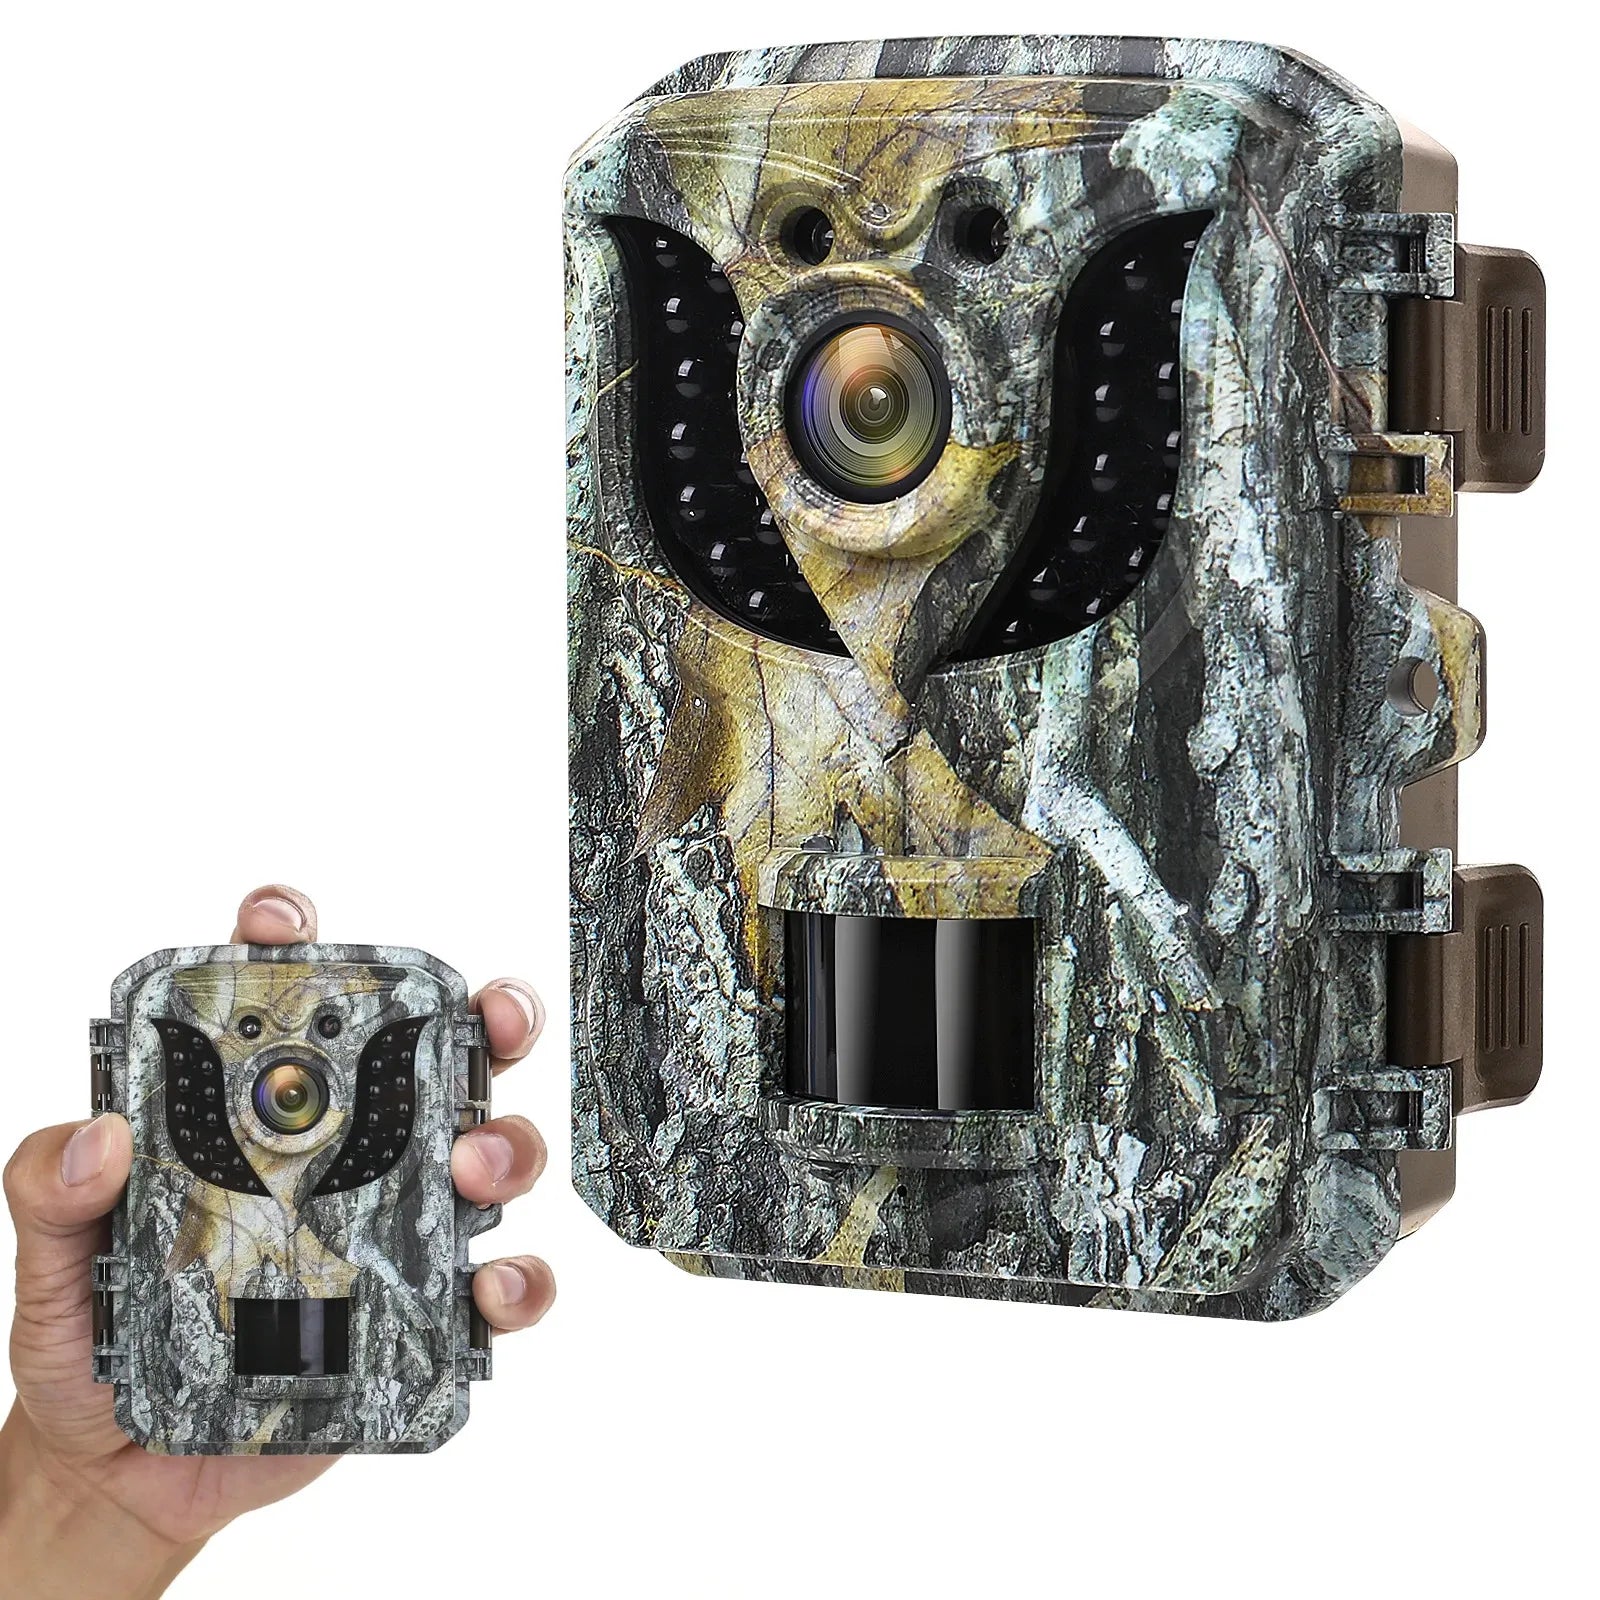 Seamlessly blend into the wilderness with this mini game camera, featuring a compact design and camouflage pattern for discreet wildlife photography and observation.